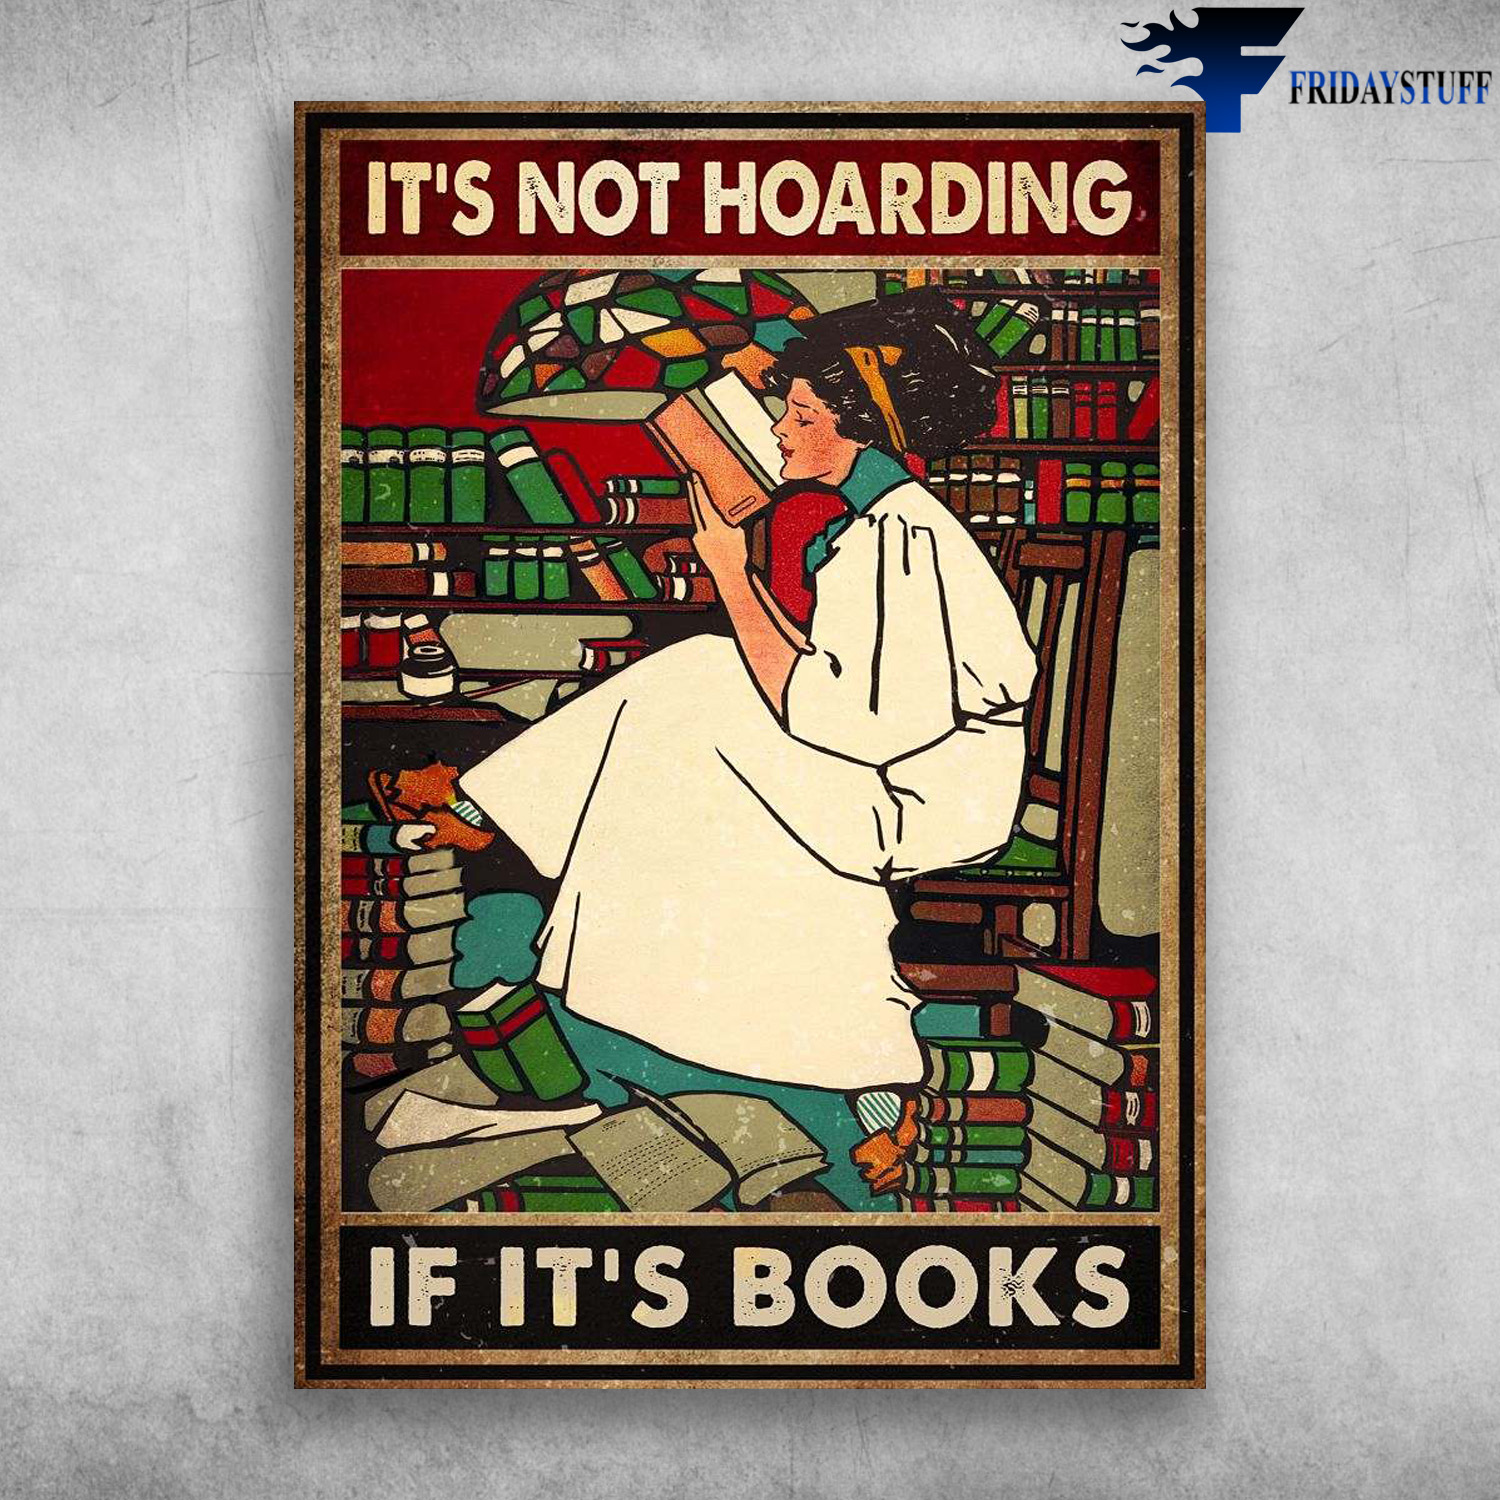 Girl Library, Reading Book - It's Not Hoarding, If It's Books